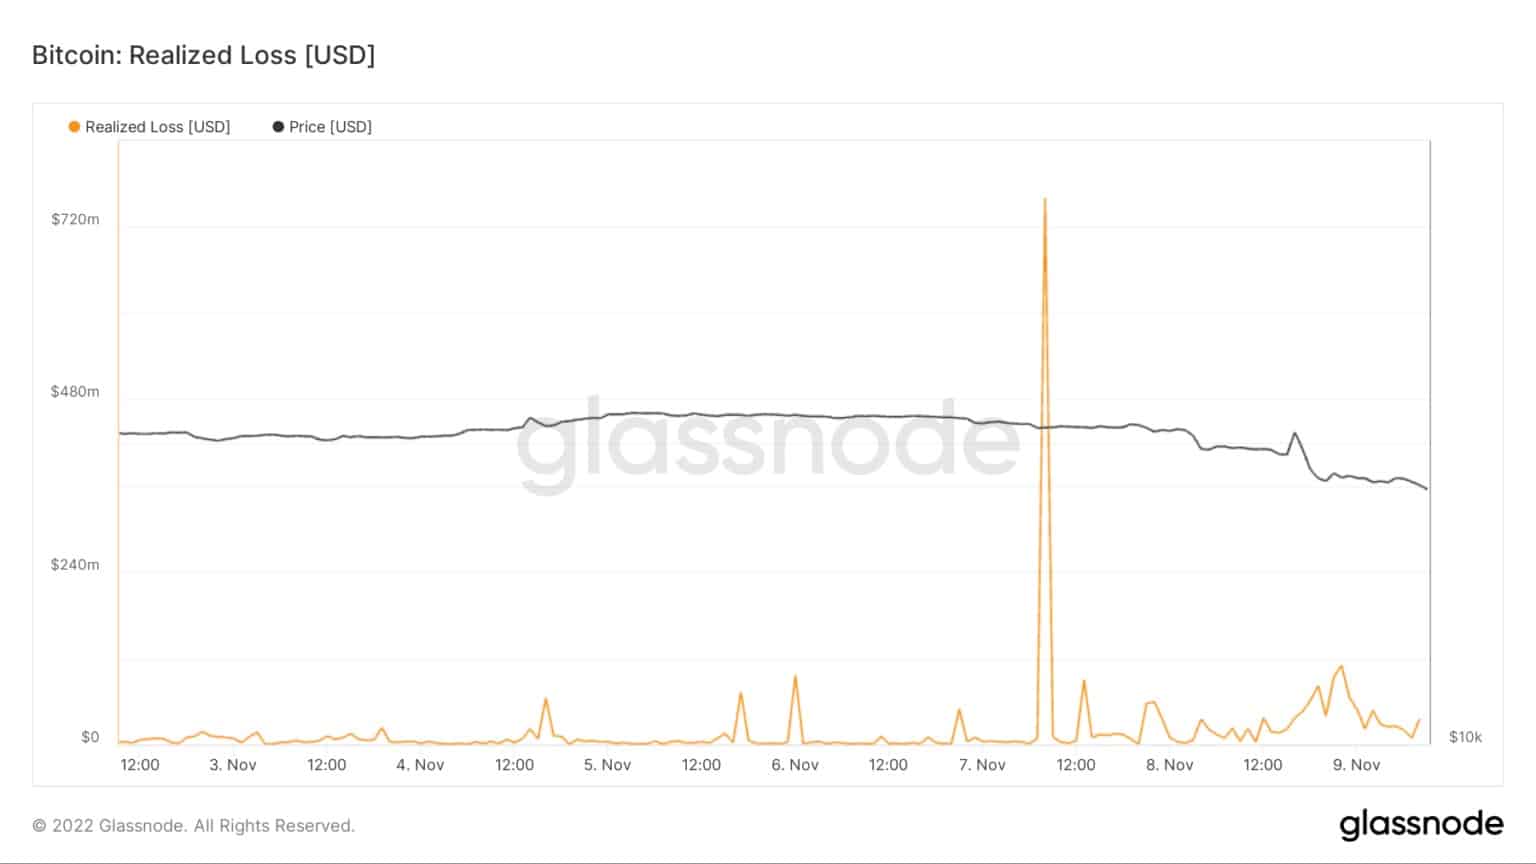 Graph showing the realized loss for Bitcoin from Nov. 3 to Nov. 9 (Source: Glassnode)